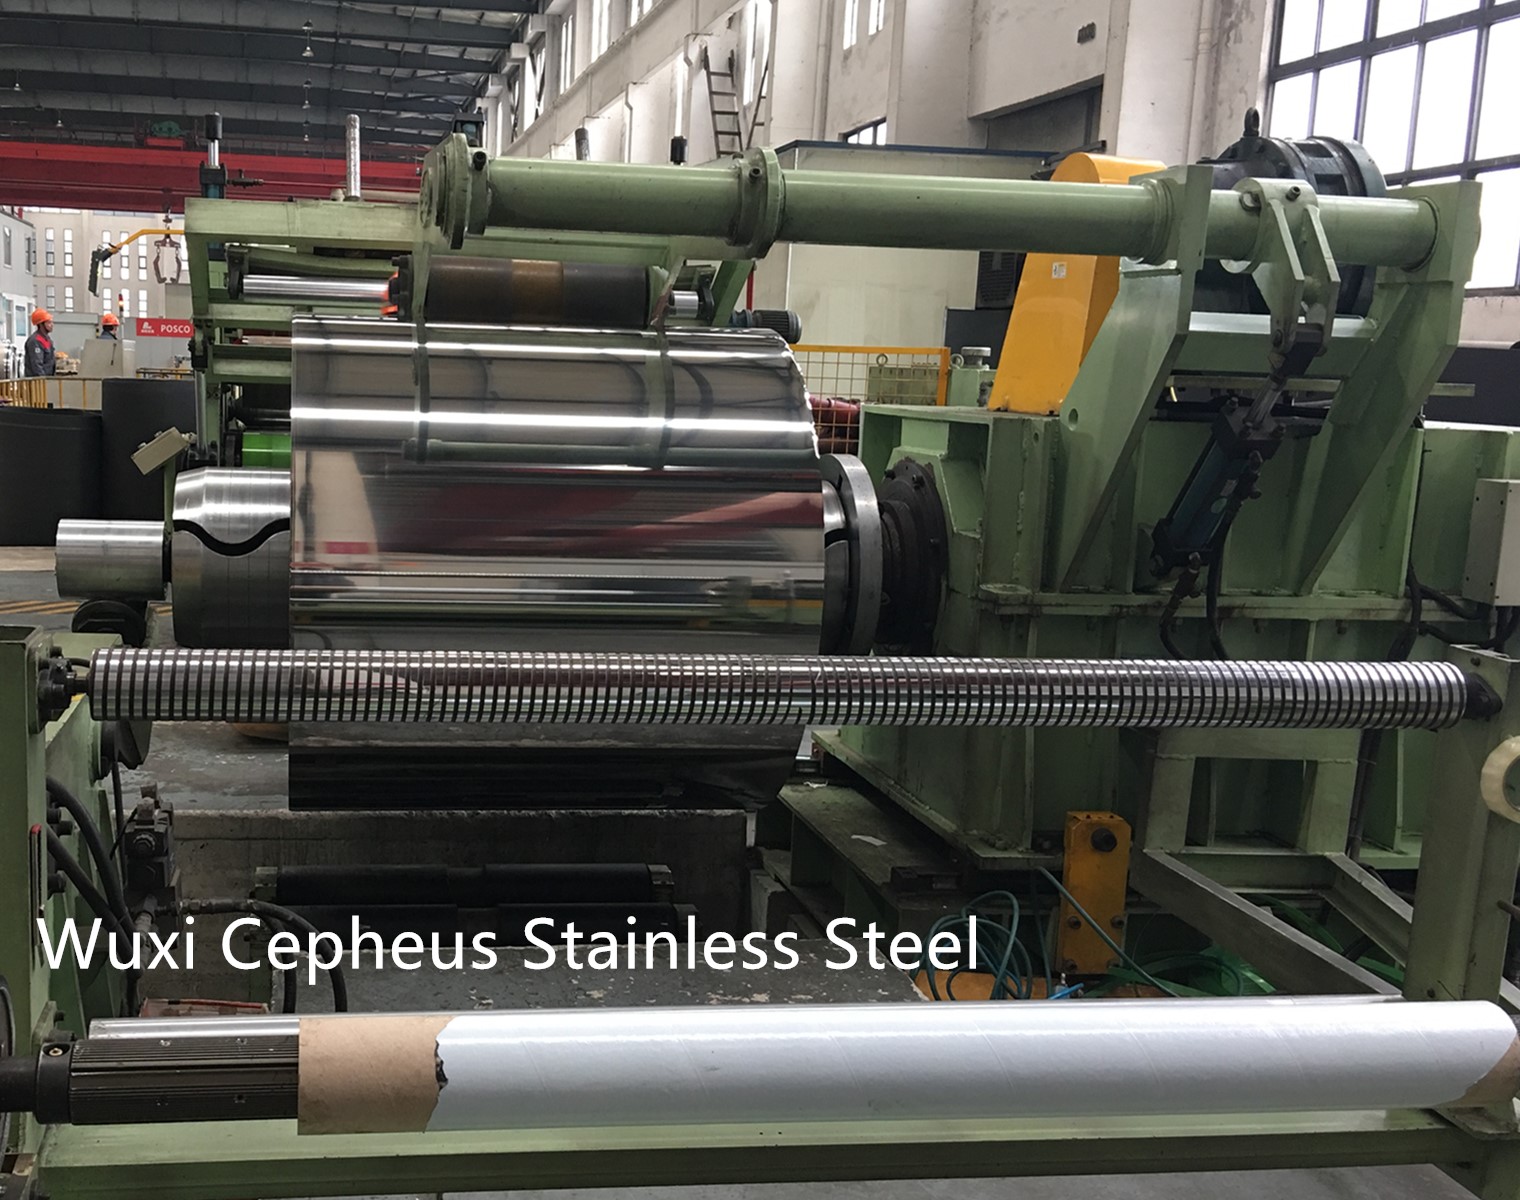 UNS C46400 Naval Brass Copper Alloy Manufacturer, Suppliers, Factories and  Company - SHAANXI SHEW-E IRON & STEEL CO., LTD